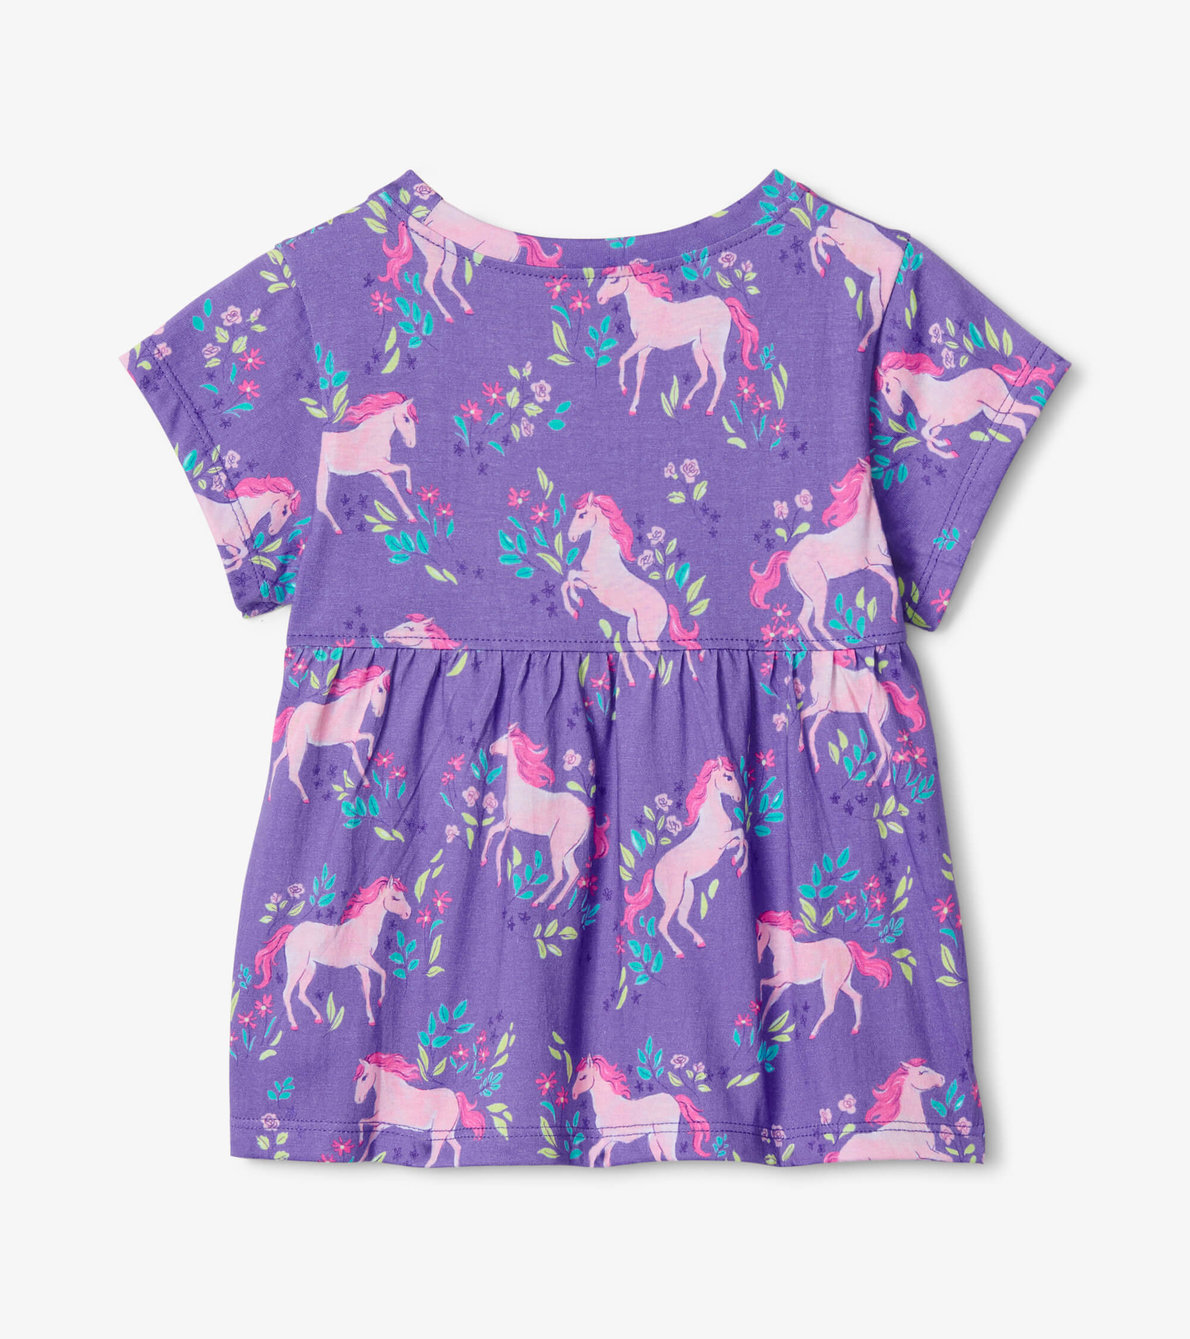 View larger image of Meadow Pony Toddler Graphic Tee